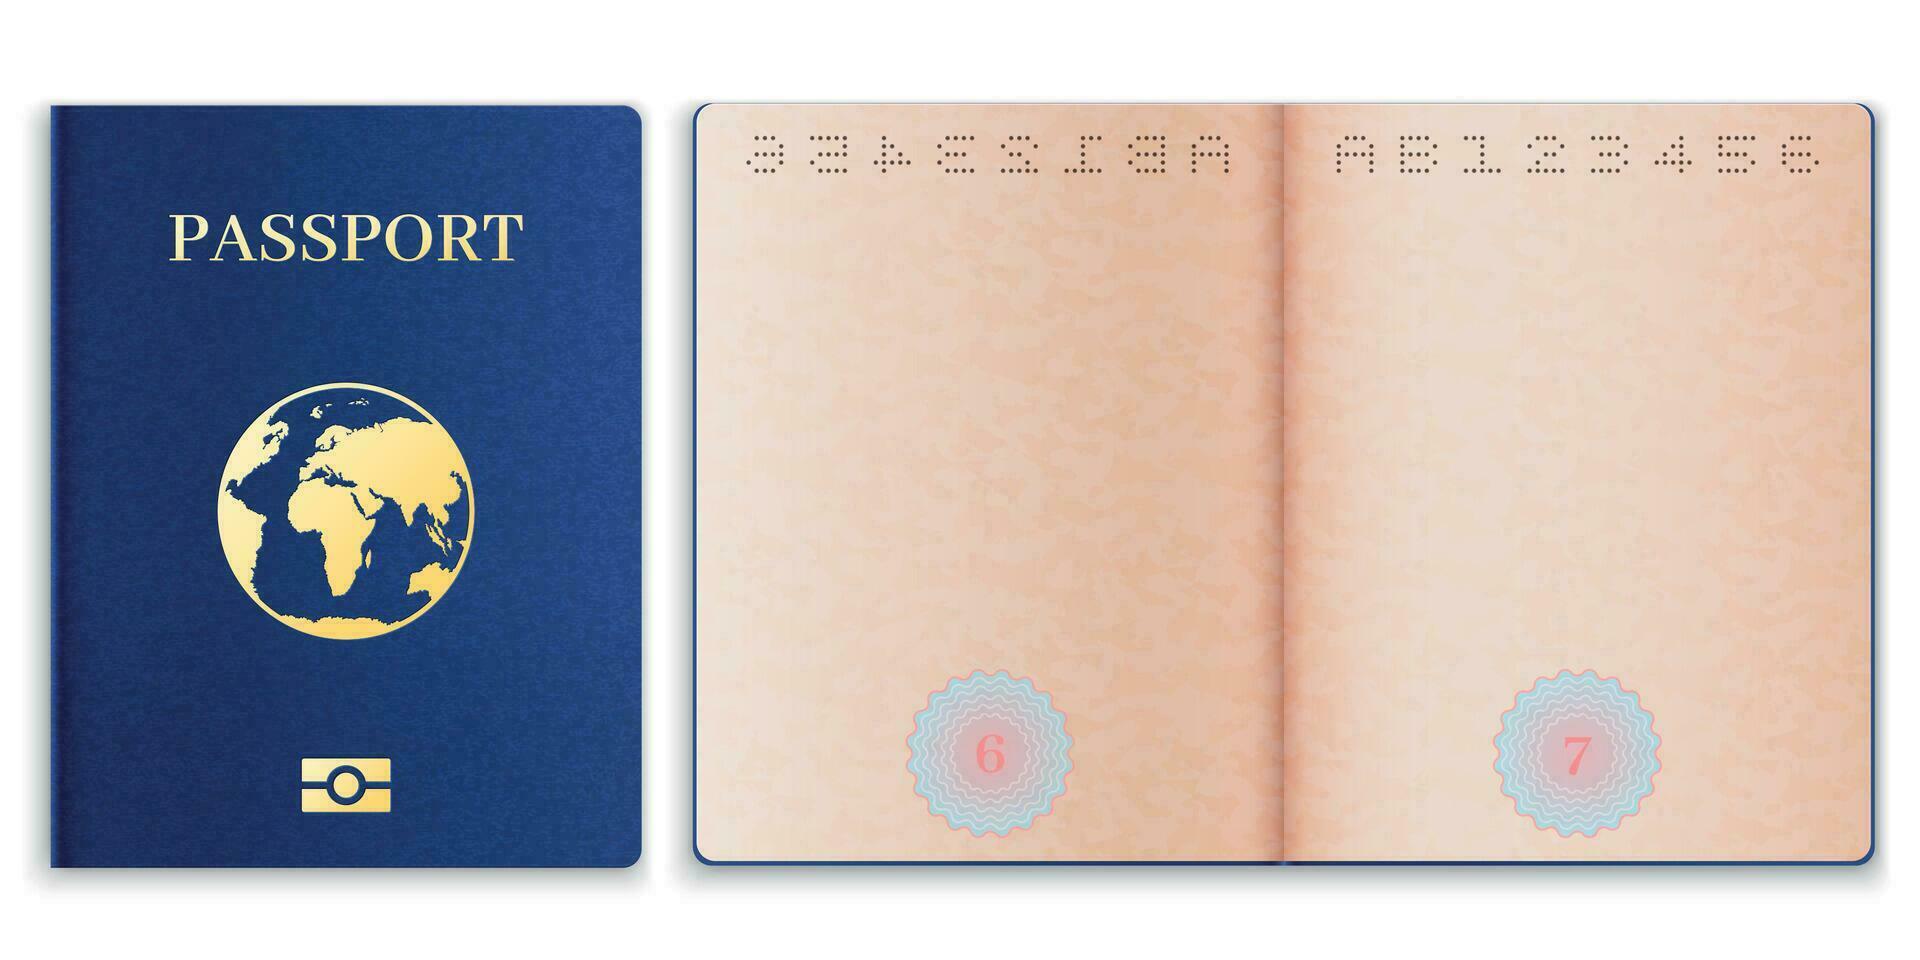 Passport Mockup Realistic Blank Open Pages Paper With Watermark